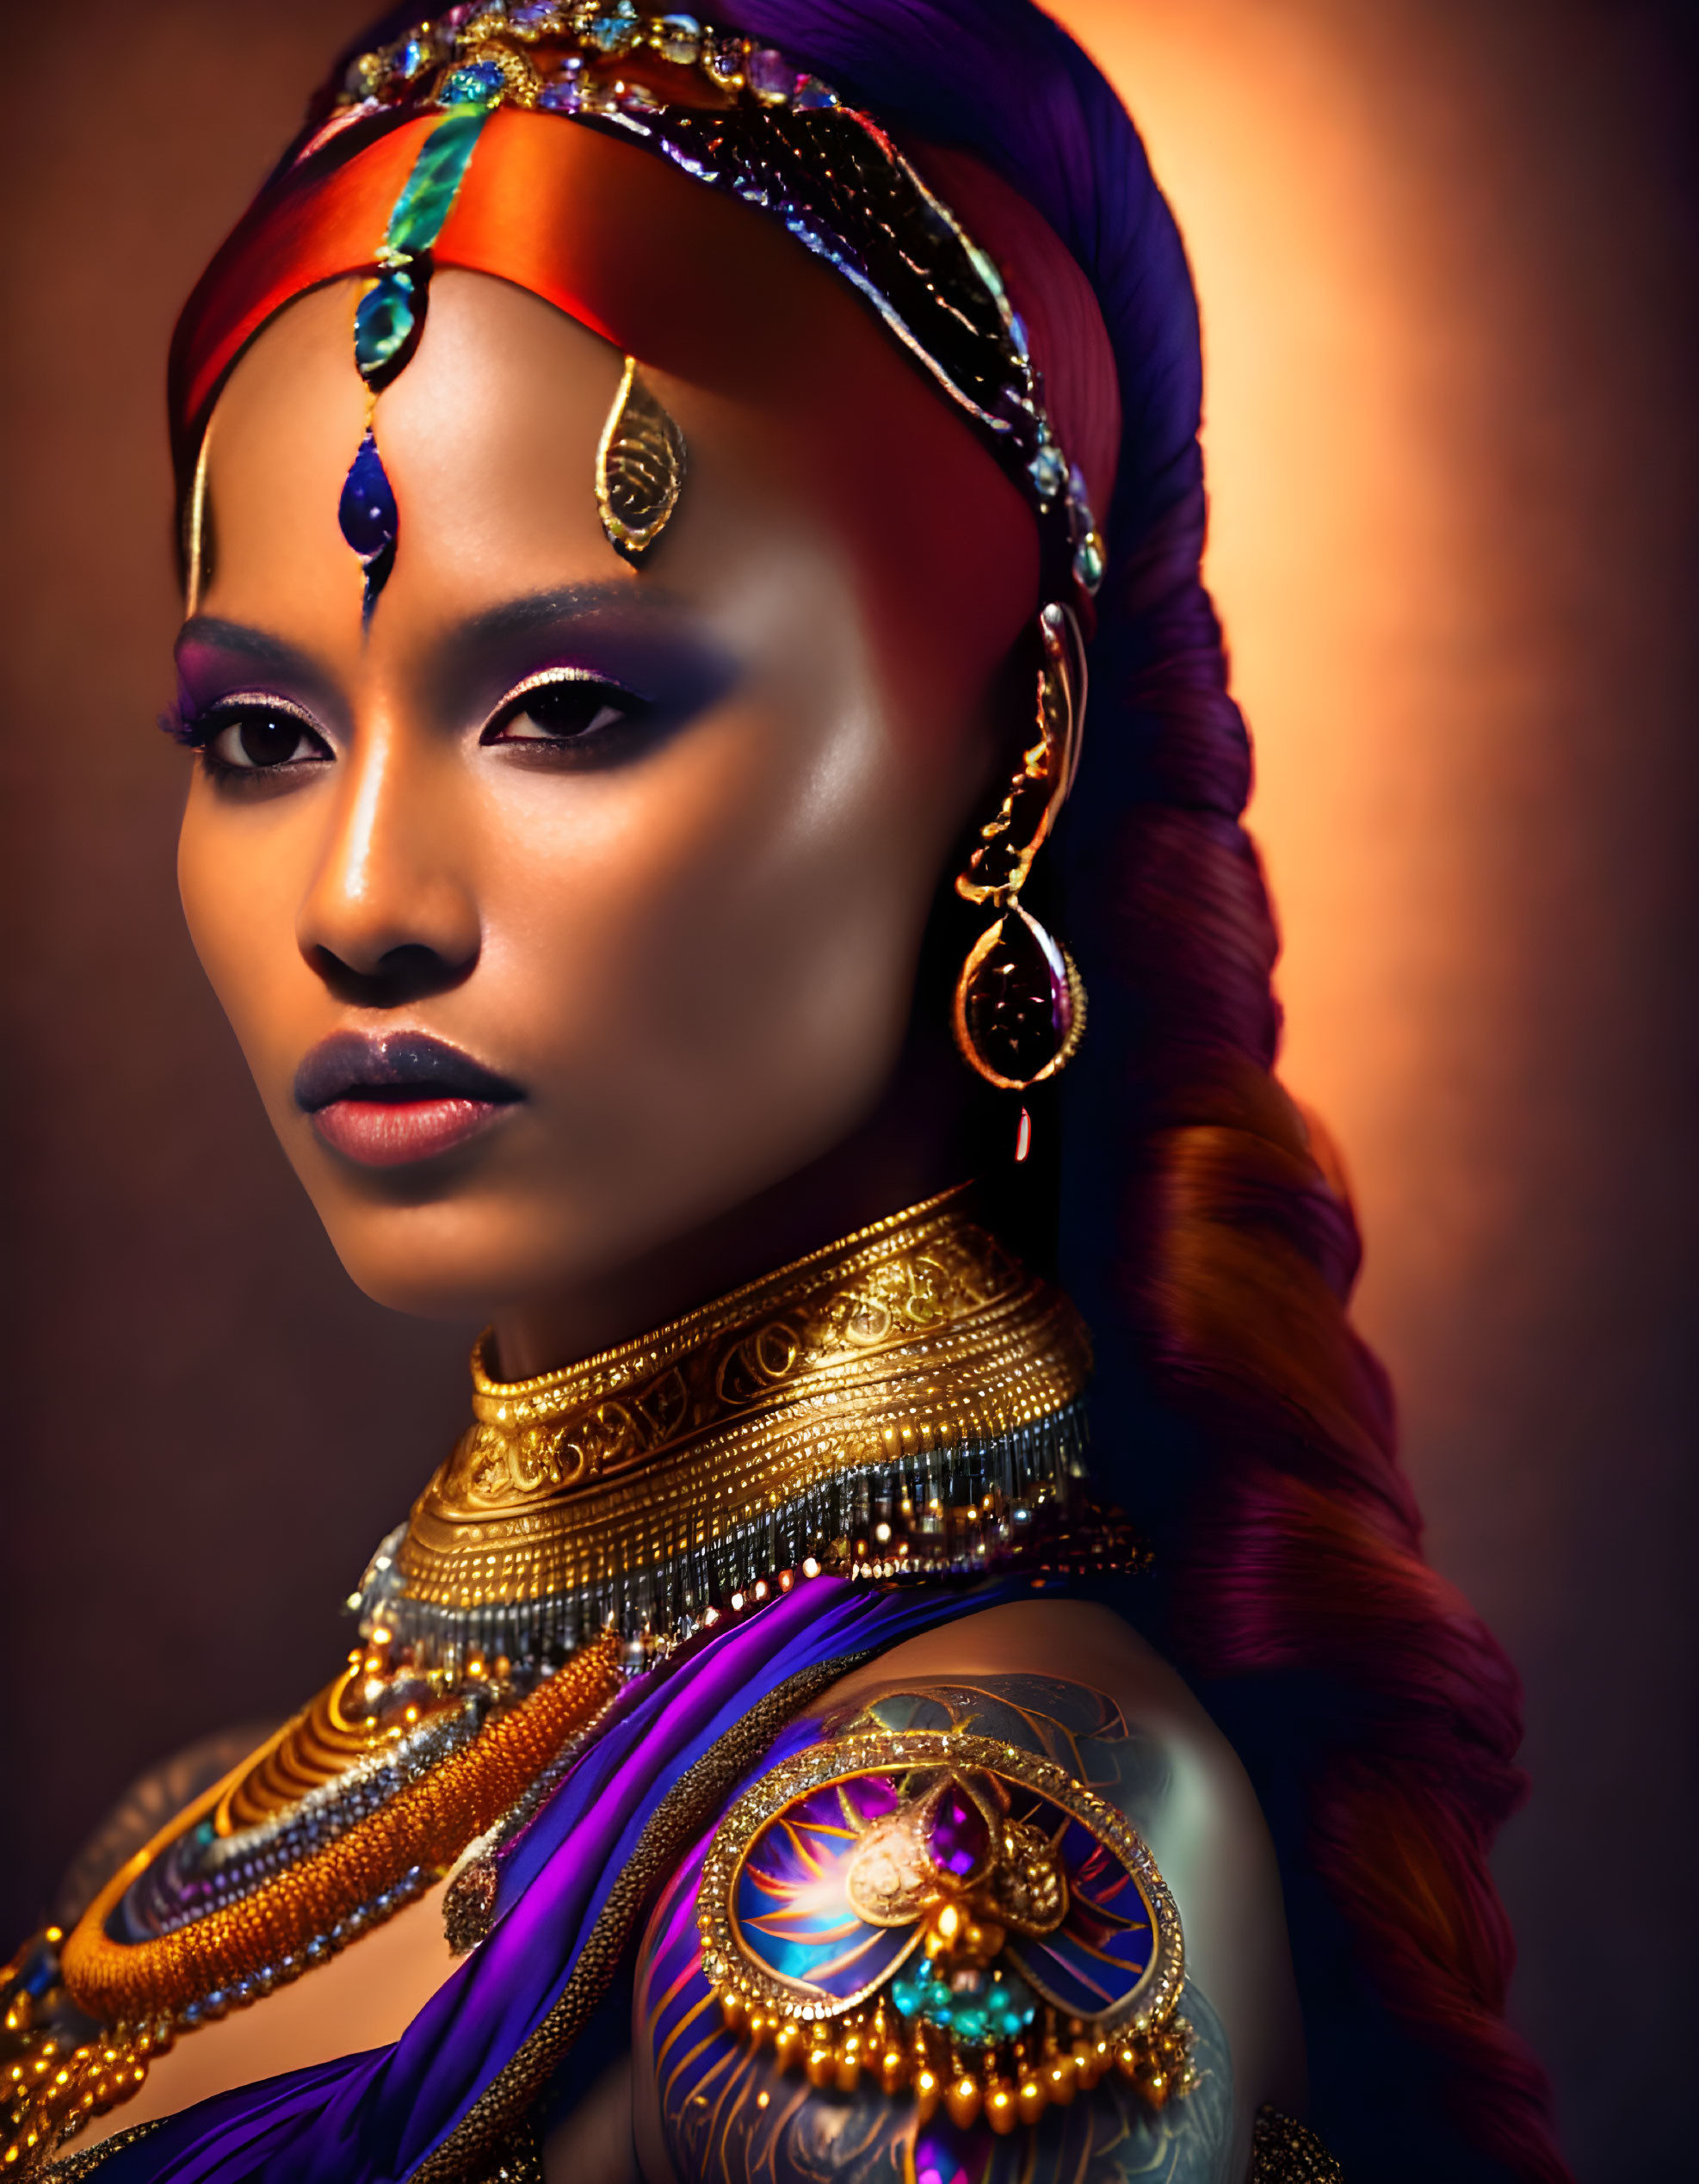 Woman with Side Braid Wearing Ornate Golden Jewelry